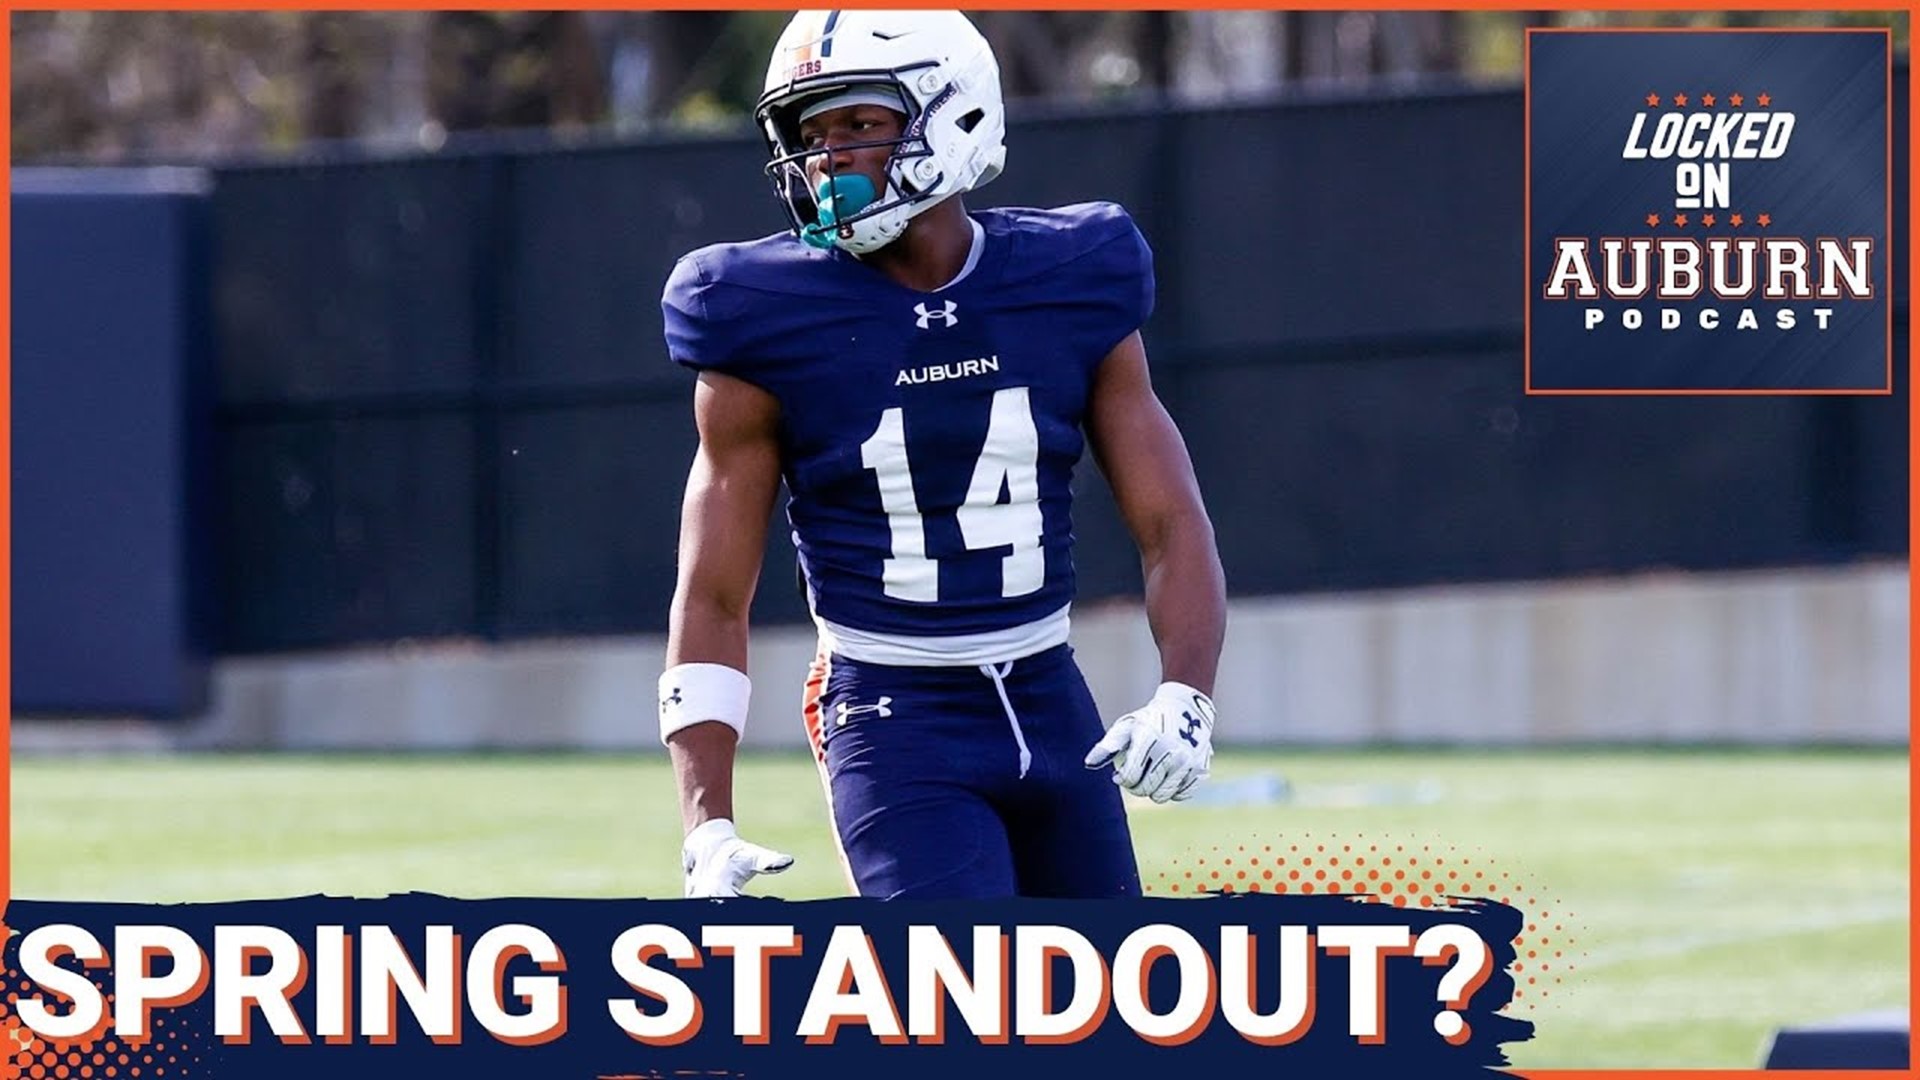 An offensive Auburn Tiger standing out this spring that will get you excited - Auburn Tigers Podcast